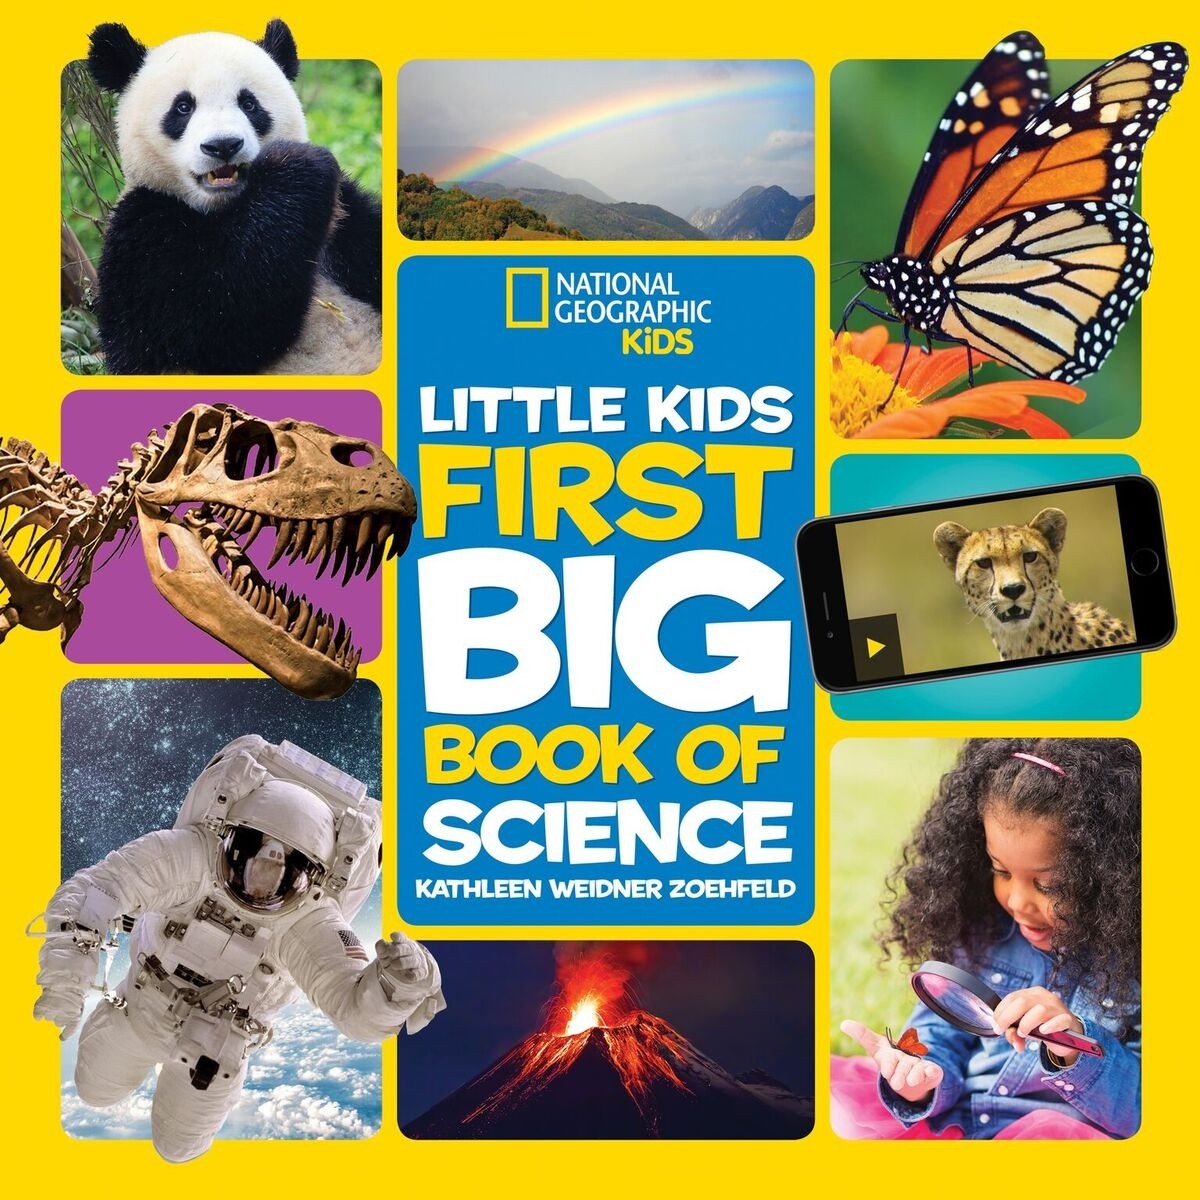 'Little Kids First Big Book of Science' makes science fun for kids this